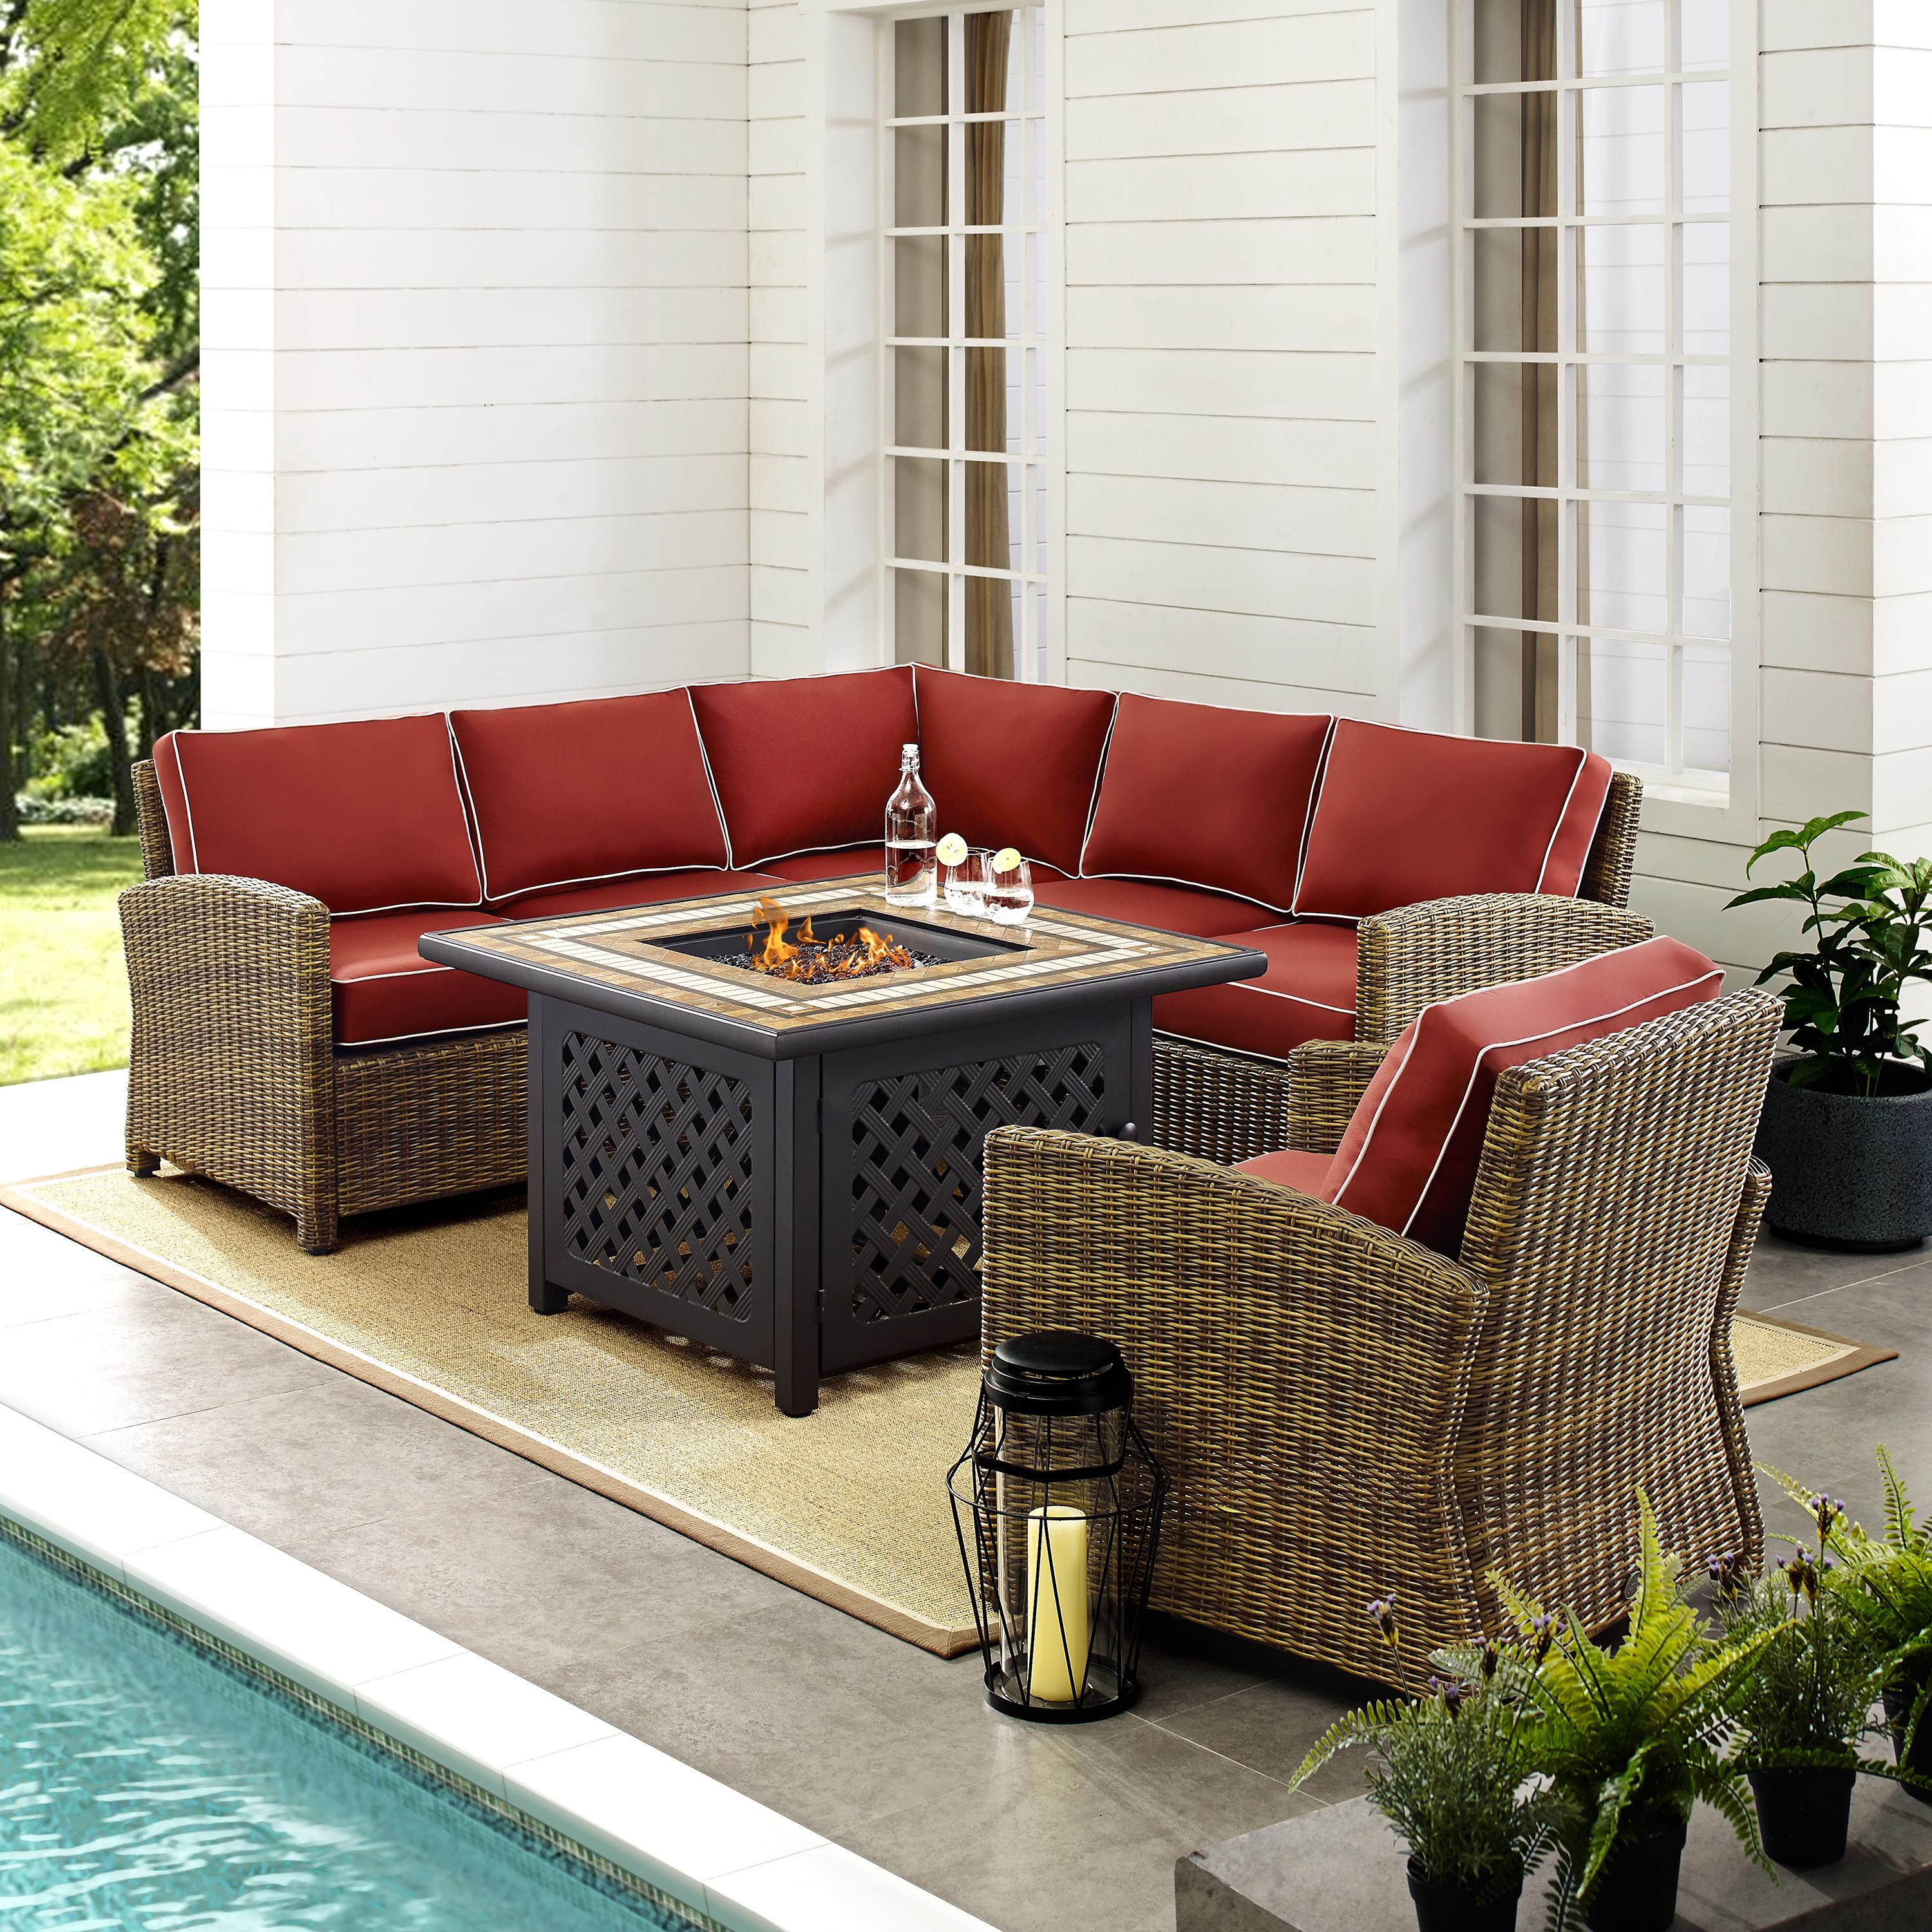 Bradenton 5Pc Outdoor Wicker Sectional Set W/Fire Table Weathered Brown/Sangria - Right Corner Loveseat, Left Corner Loveseat, Corner Chair, Armchair, & Tucson Fire Table - image 3 of 9